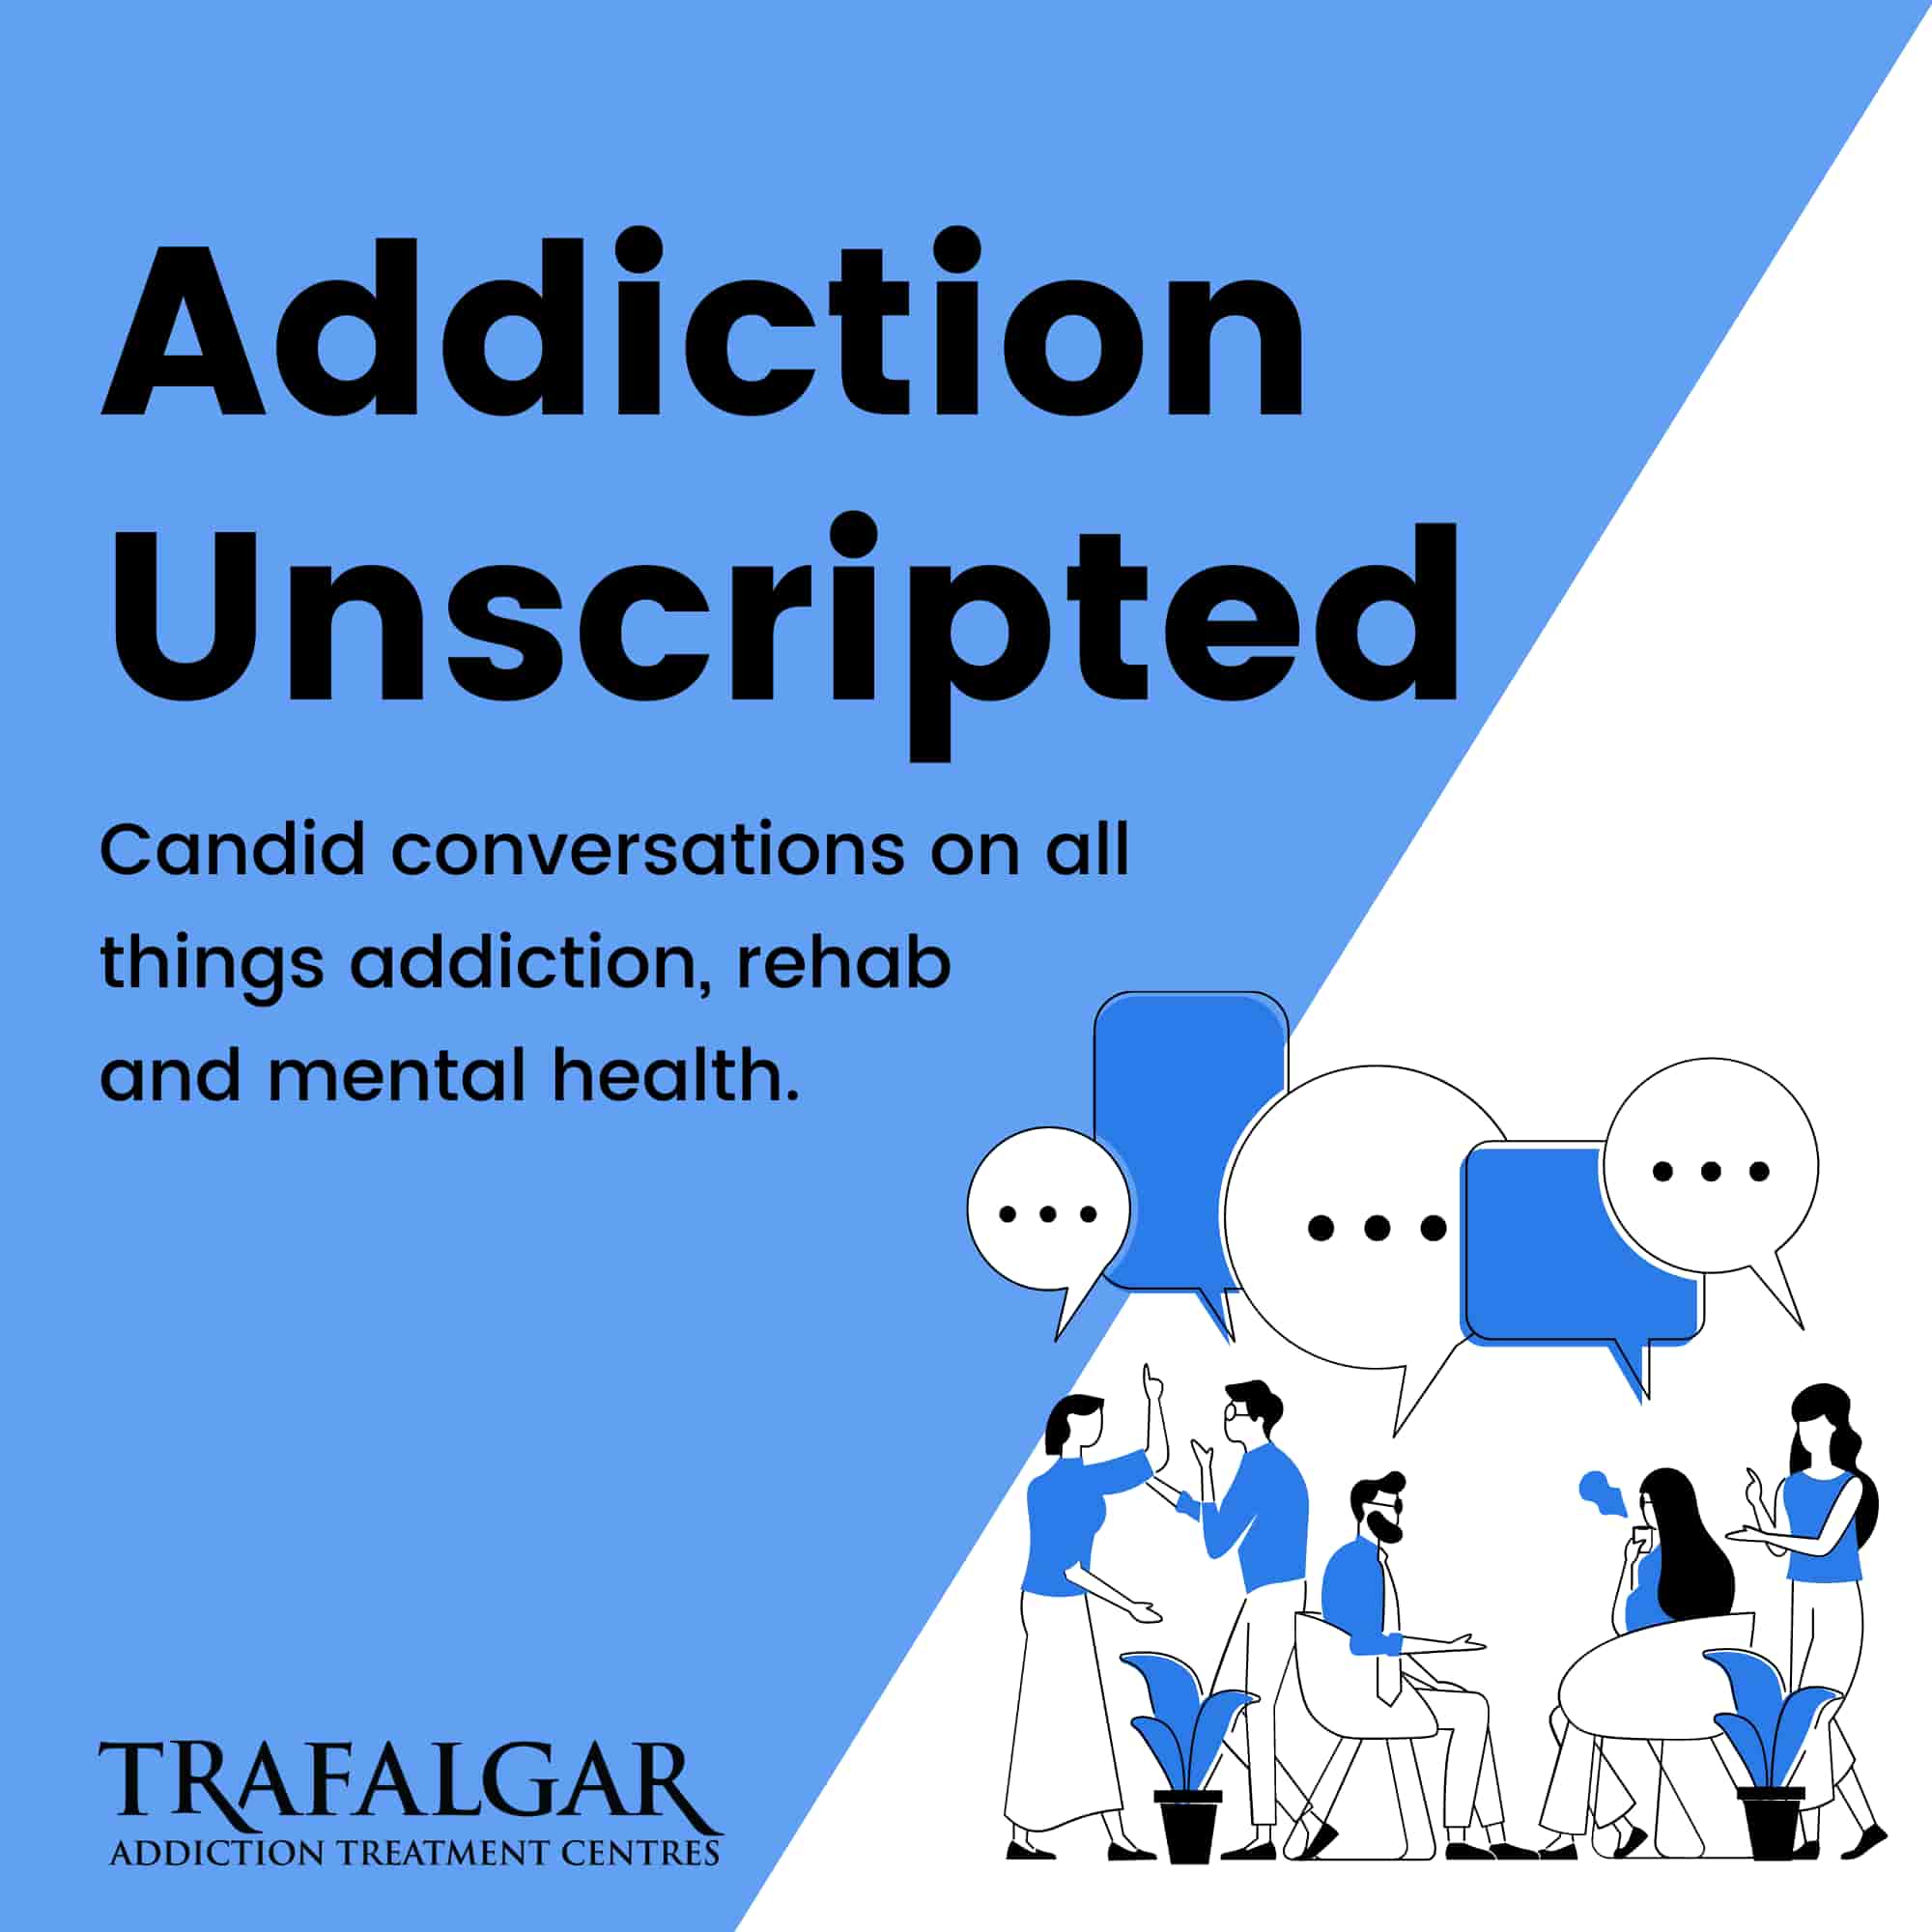 Addiction Unscripted Podcast Cover Image.